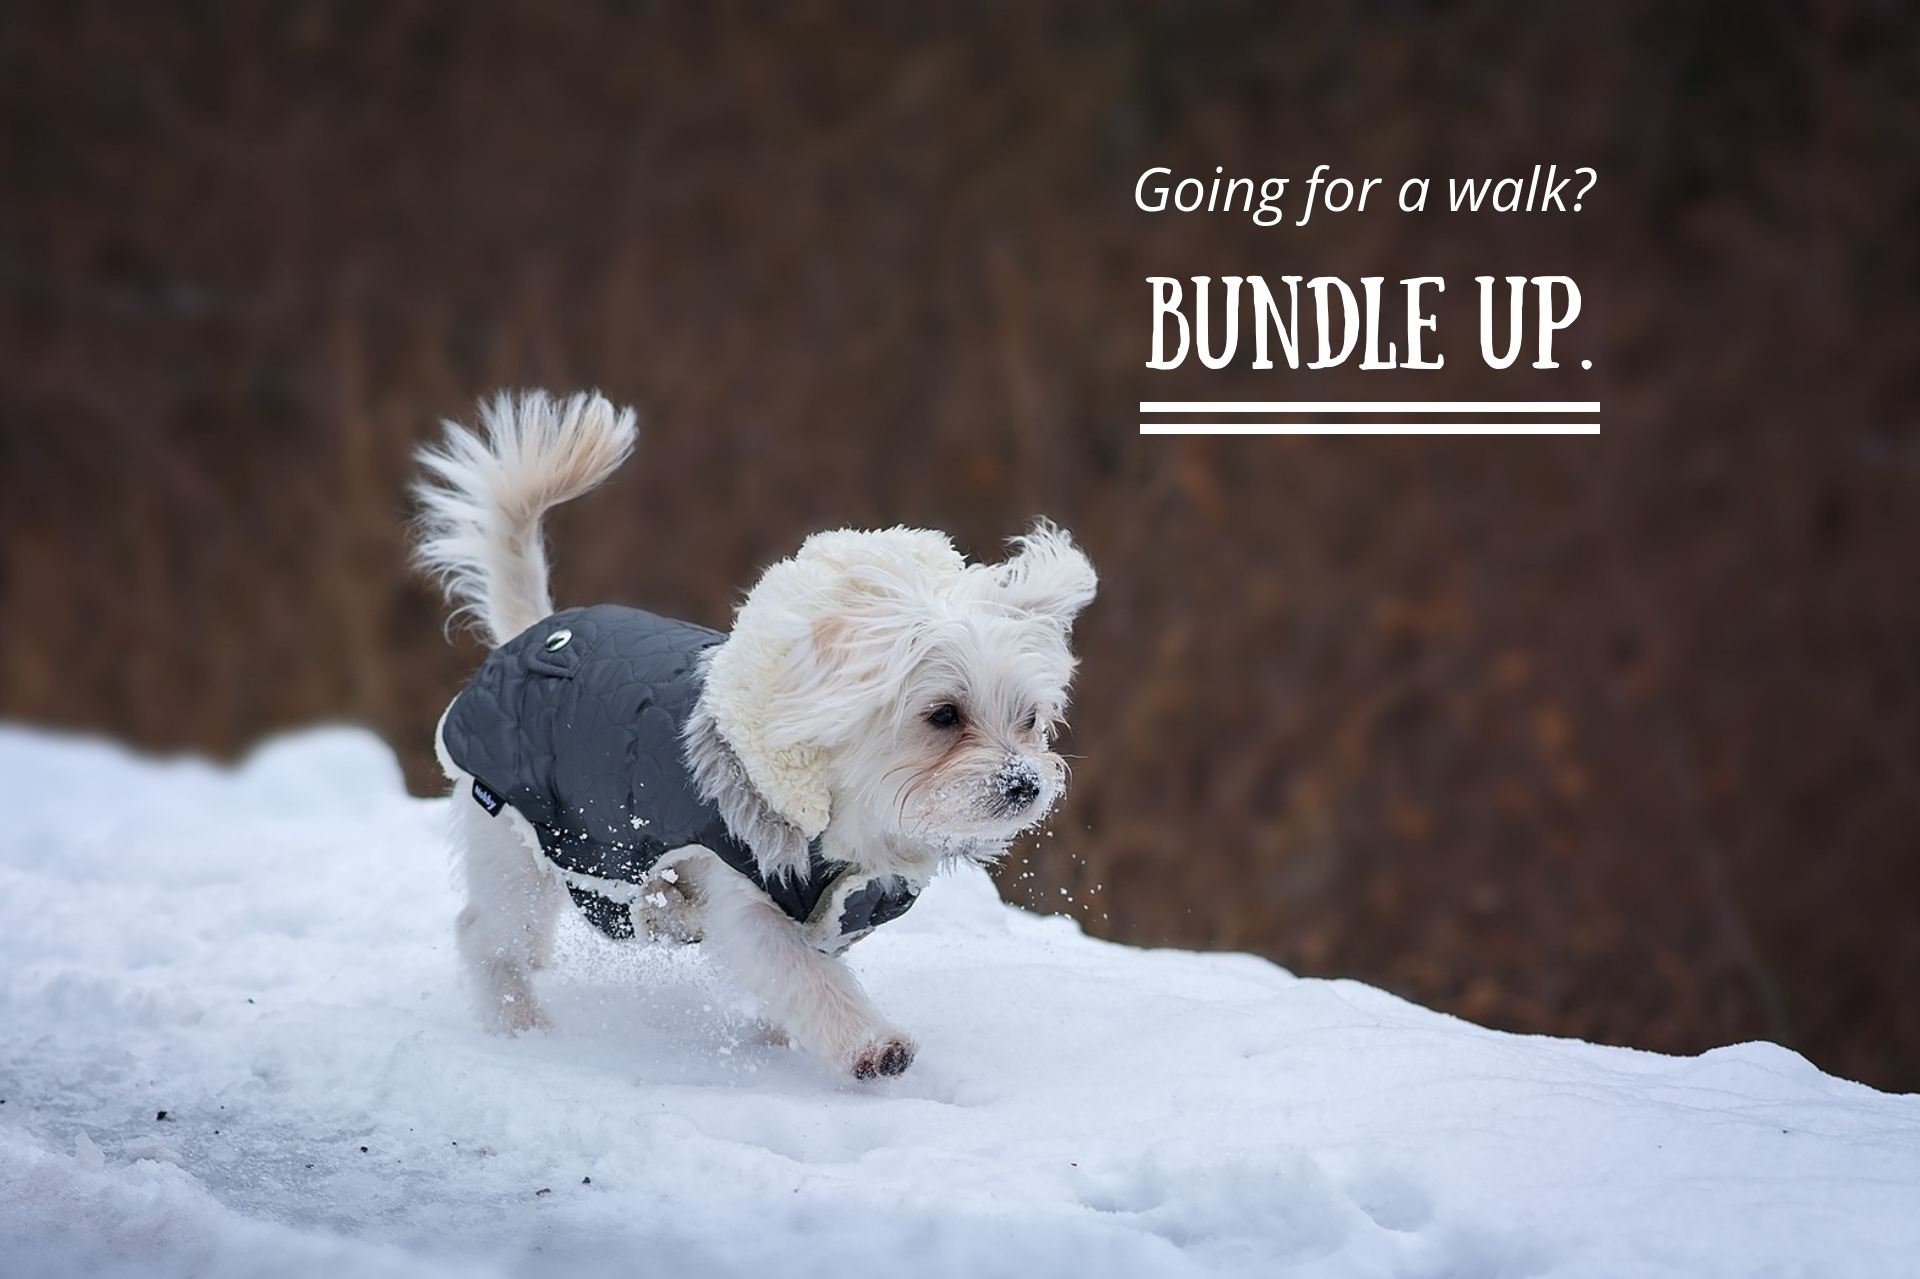 Going for a walk? Bundle up.